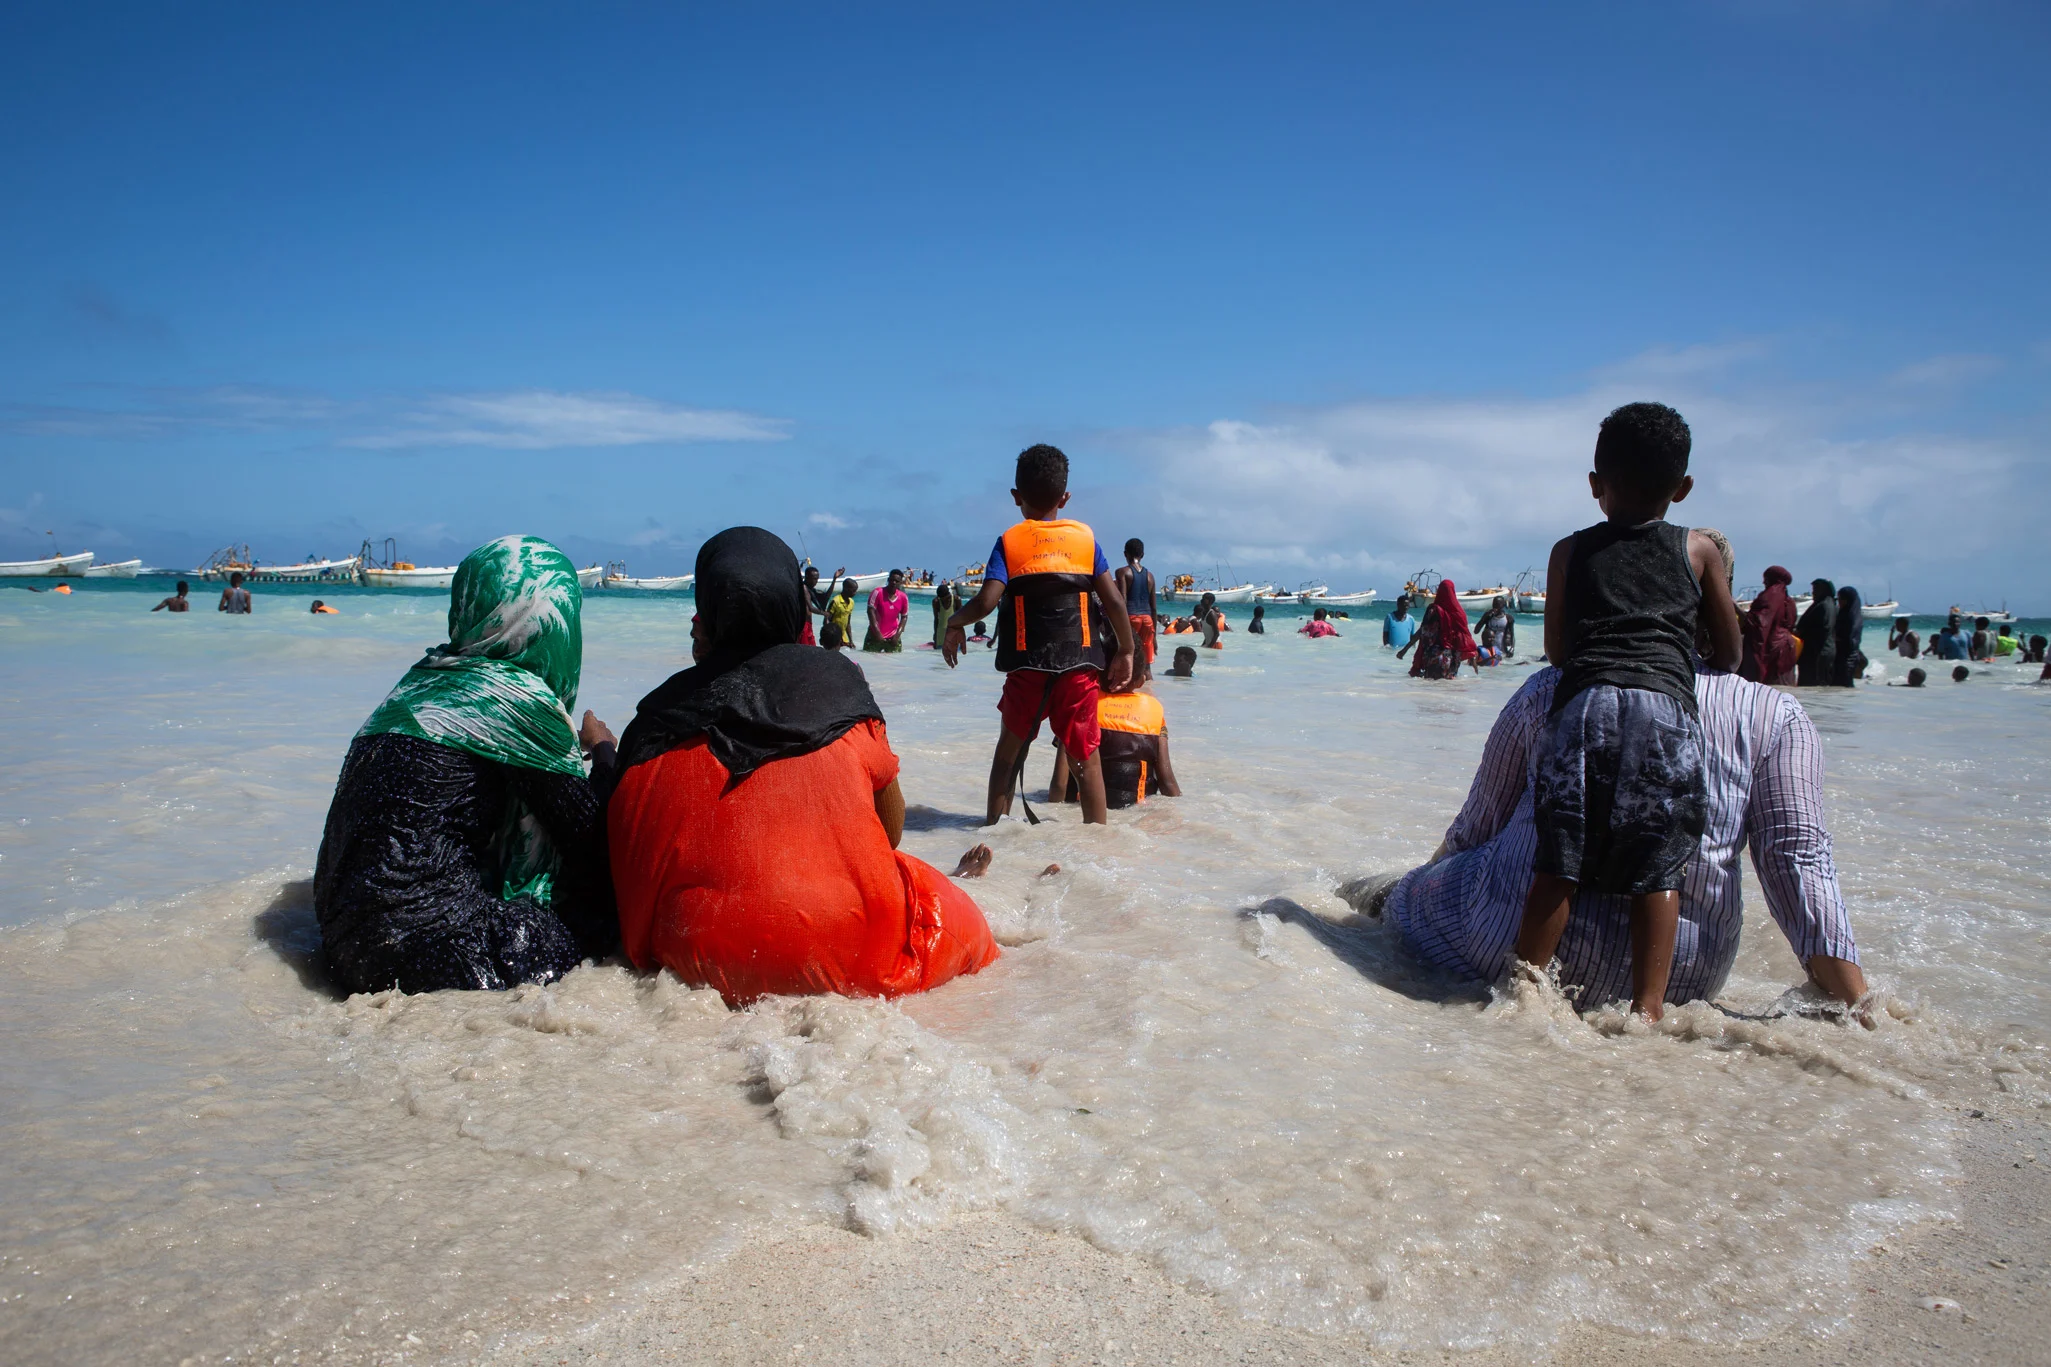 A mother and her children face the ocean at the beach in Liido, Mogadishu